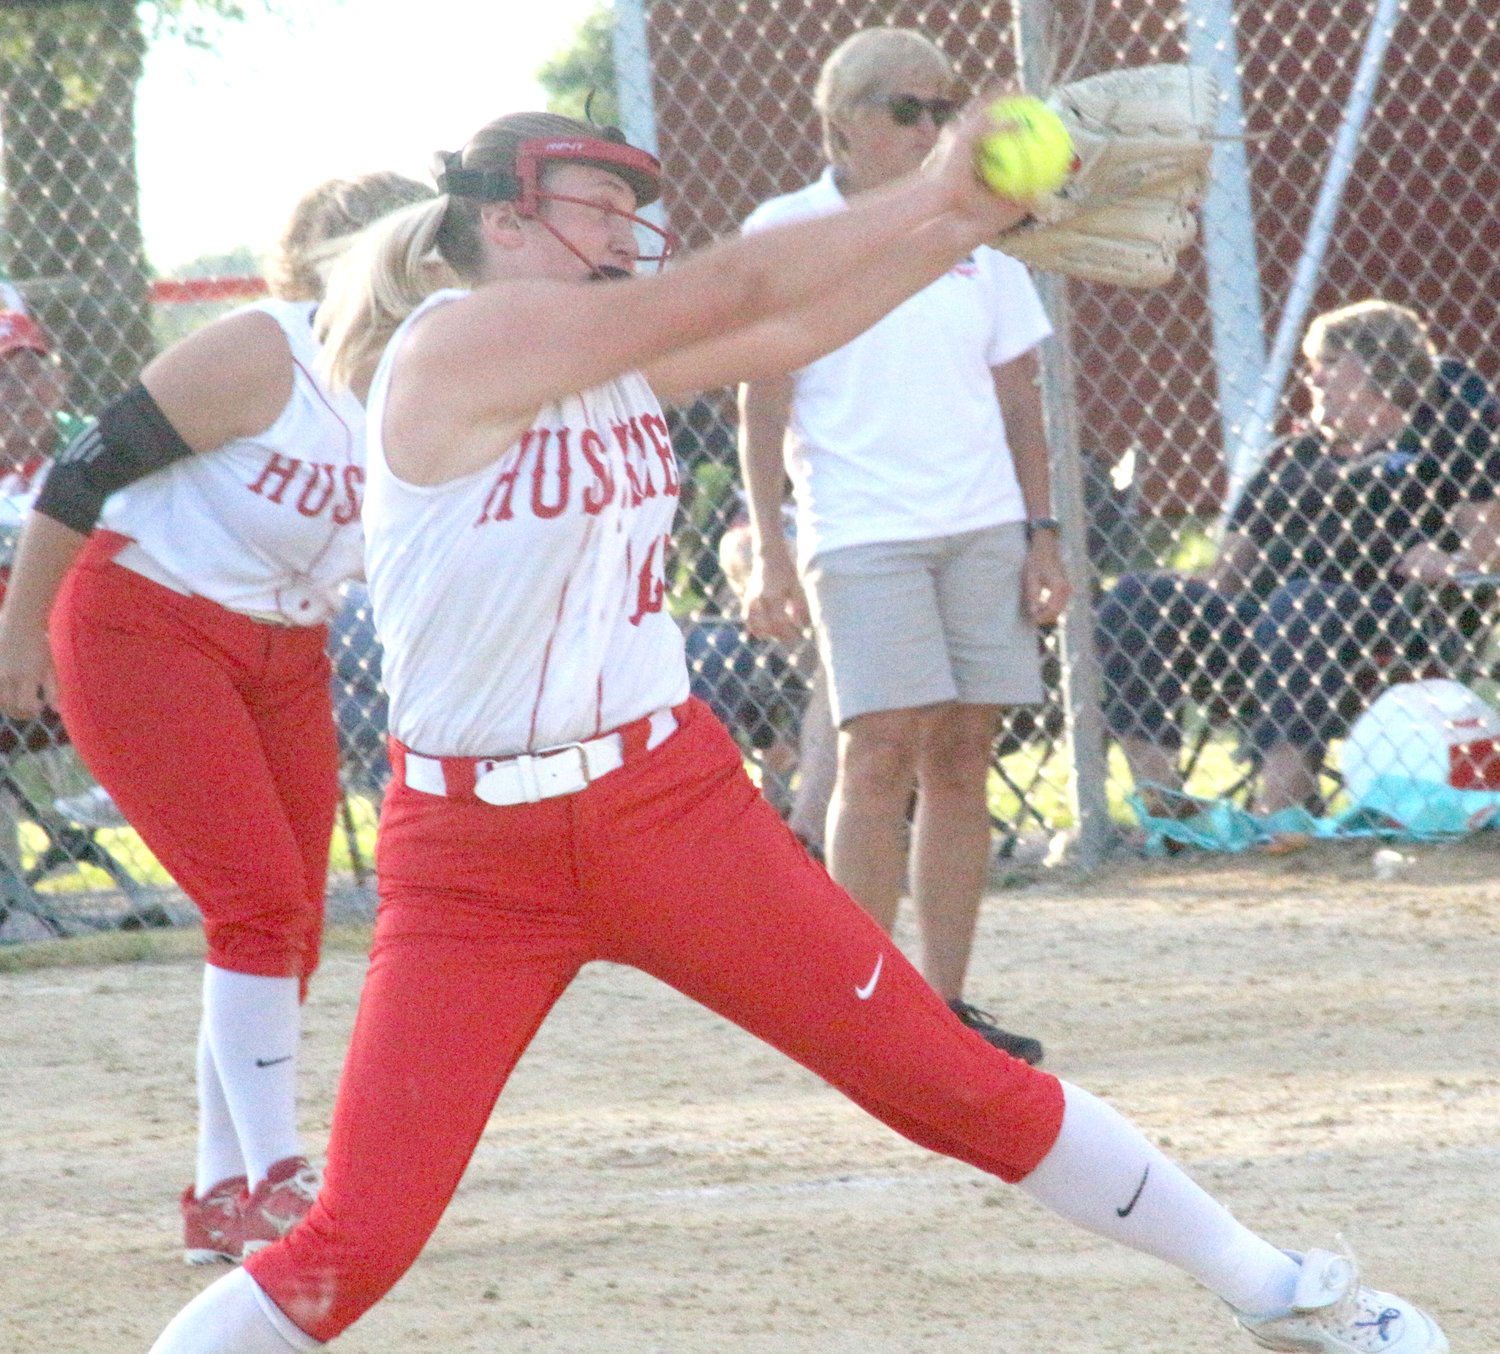 Highland’s Grace Batcheller winds up a pitch during the Huskies’ June 23 home game against Pekin.